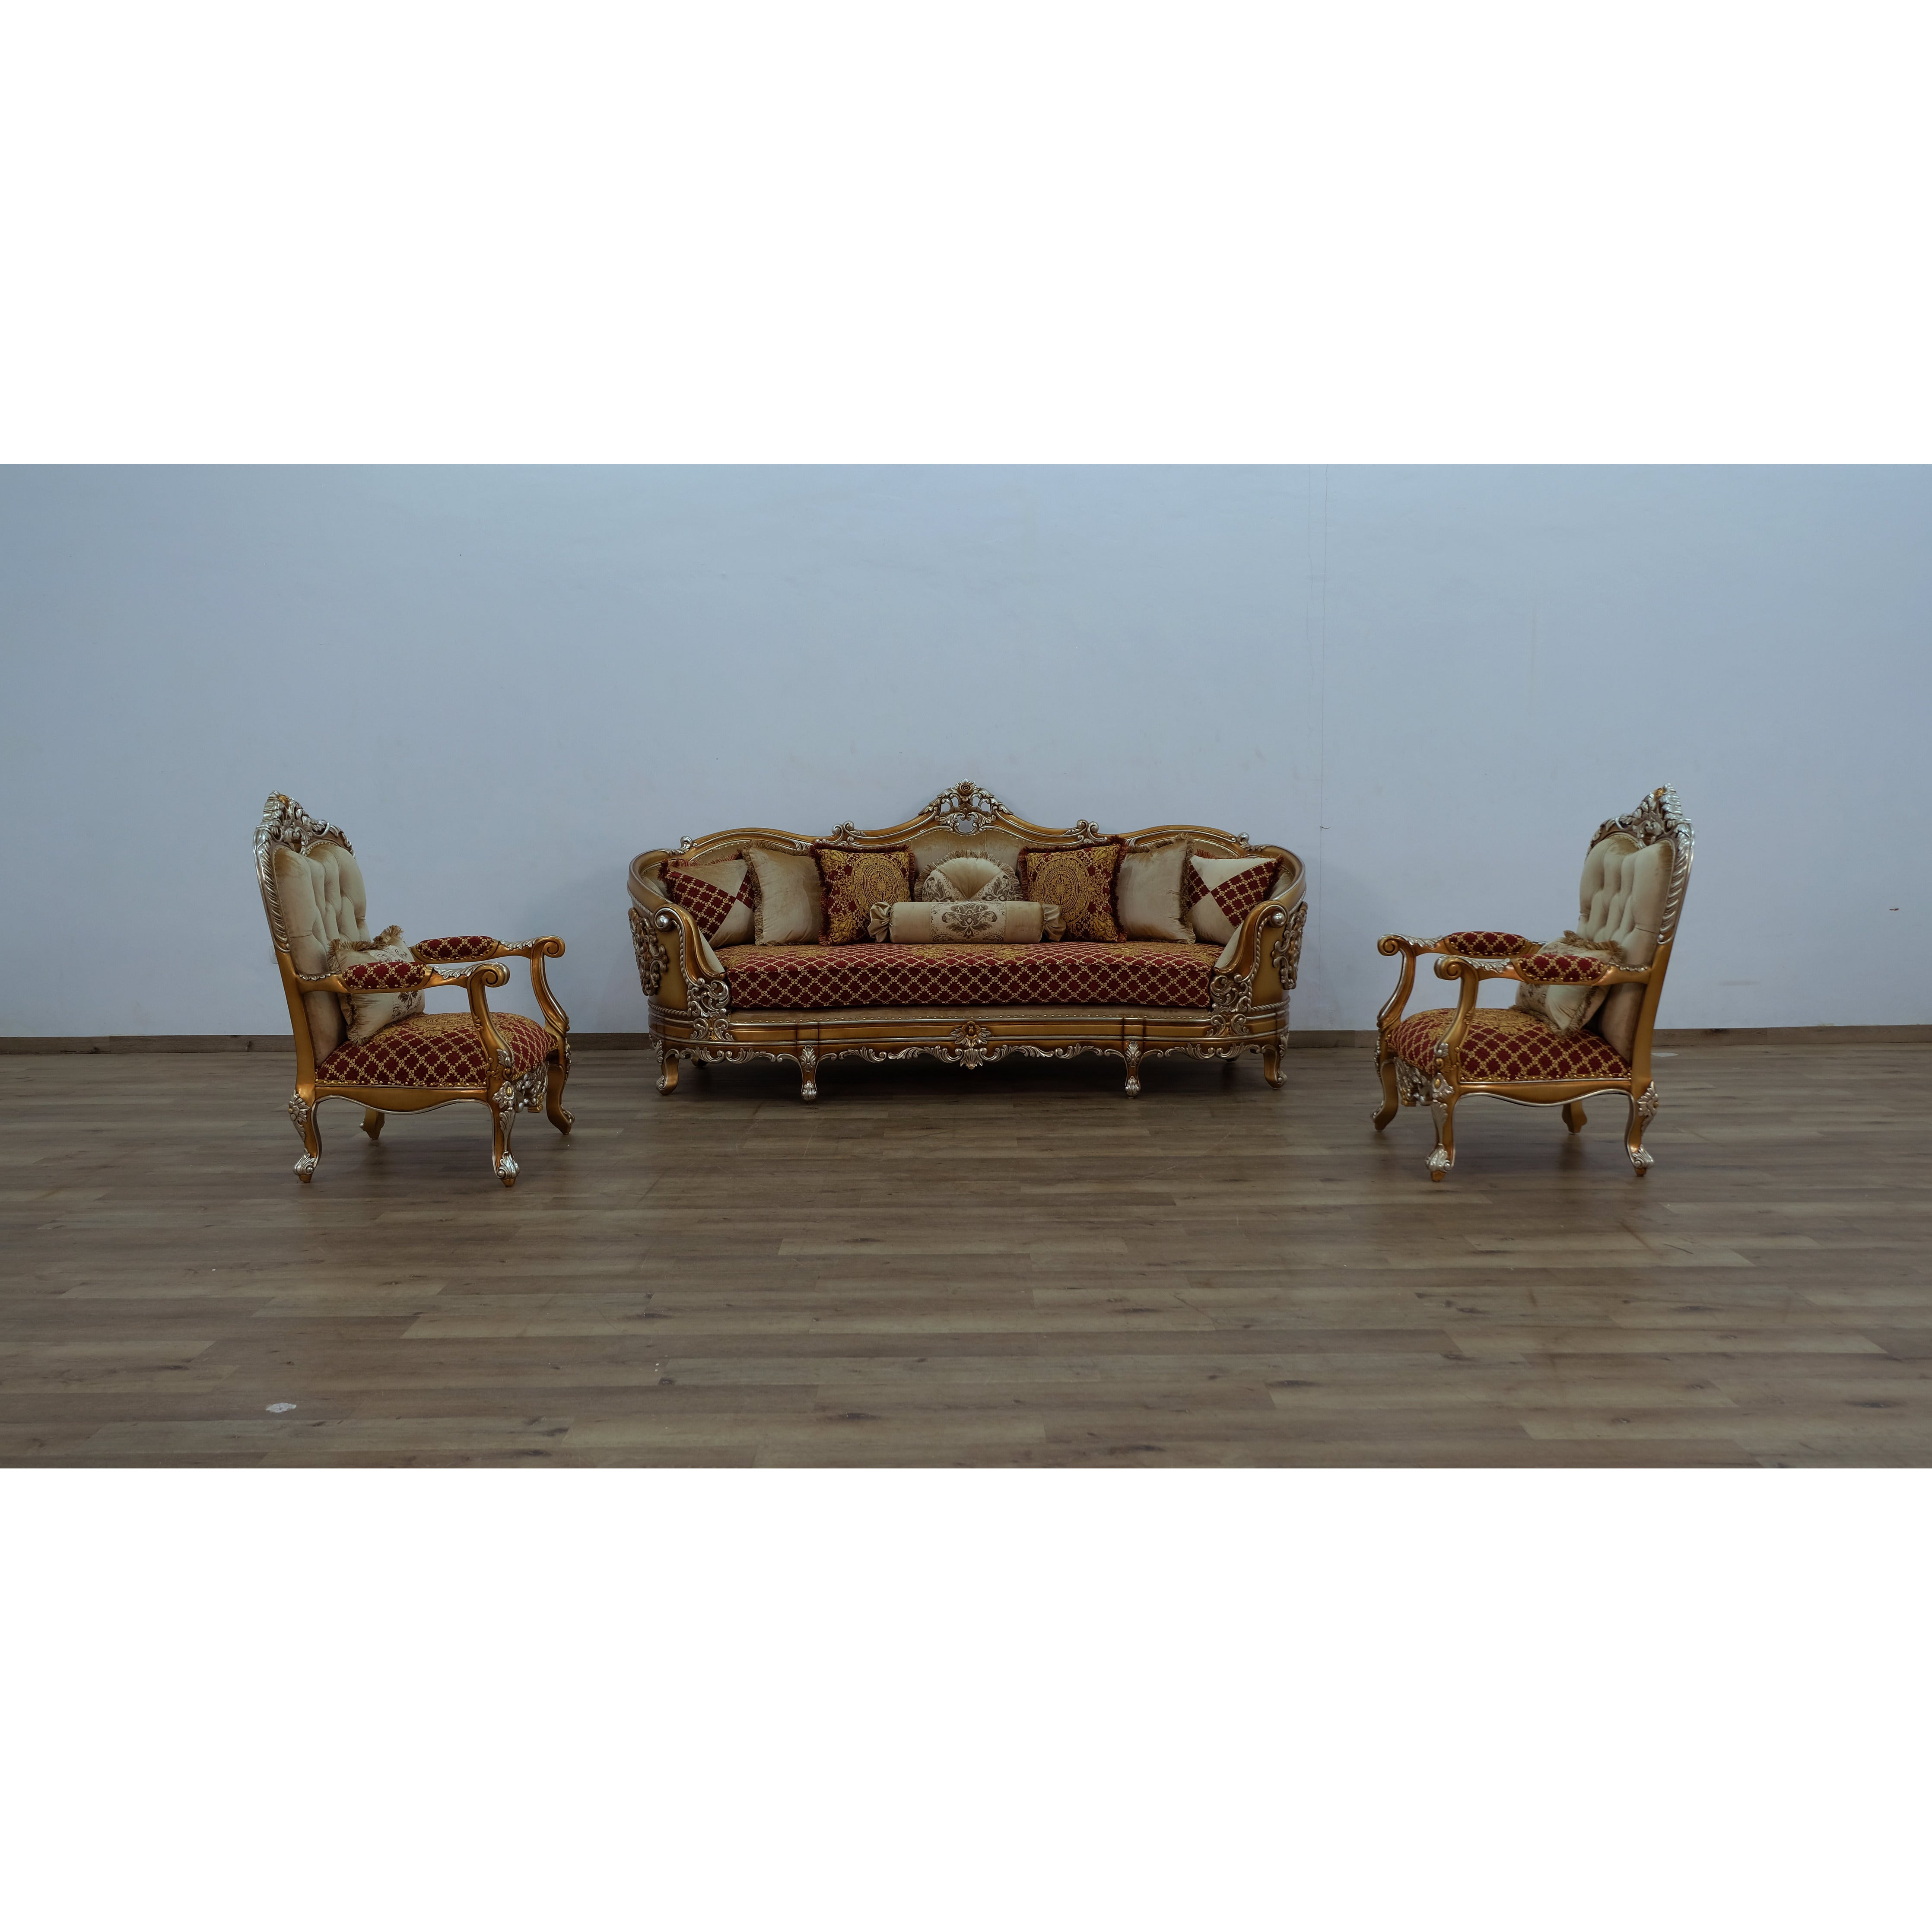 European Furniture - Saint Germain 3 Piece Luxury Living Room Set in Red Gold & Antique Silver - 35554-S2C - New Star Living